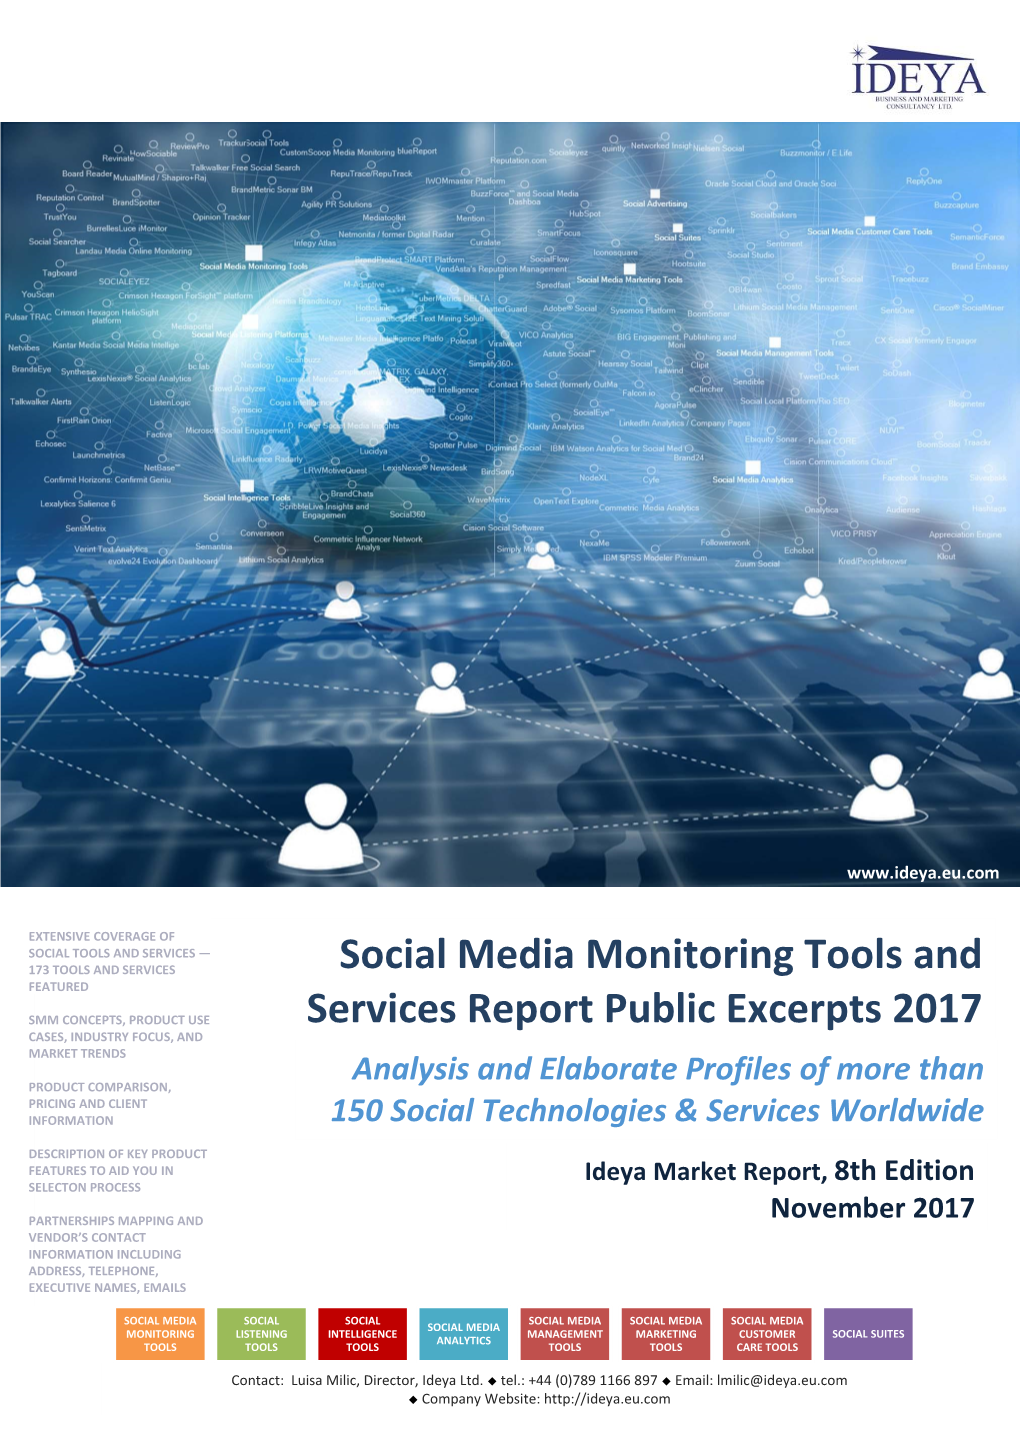 Social Media Monitoring Tools and Services Report Public Excerpts 2017